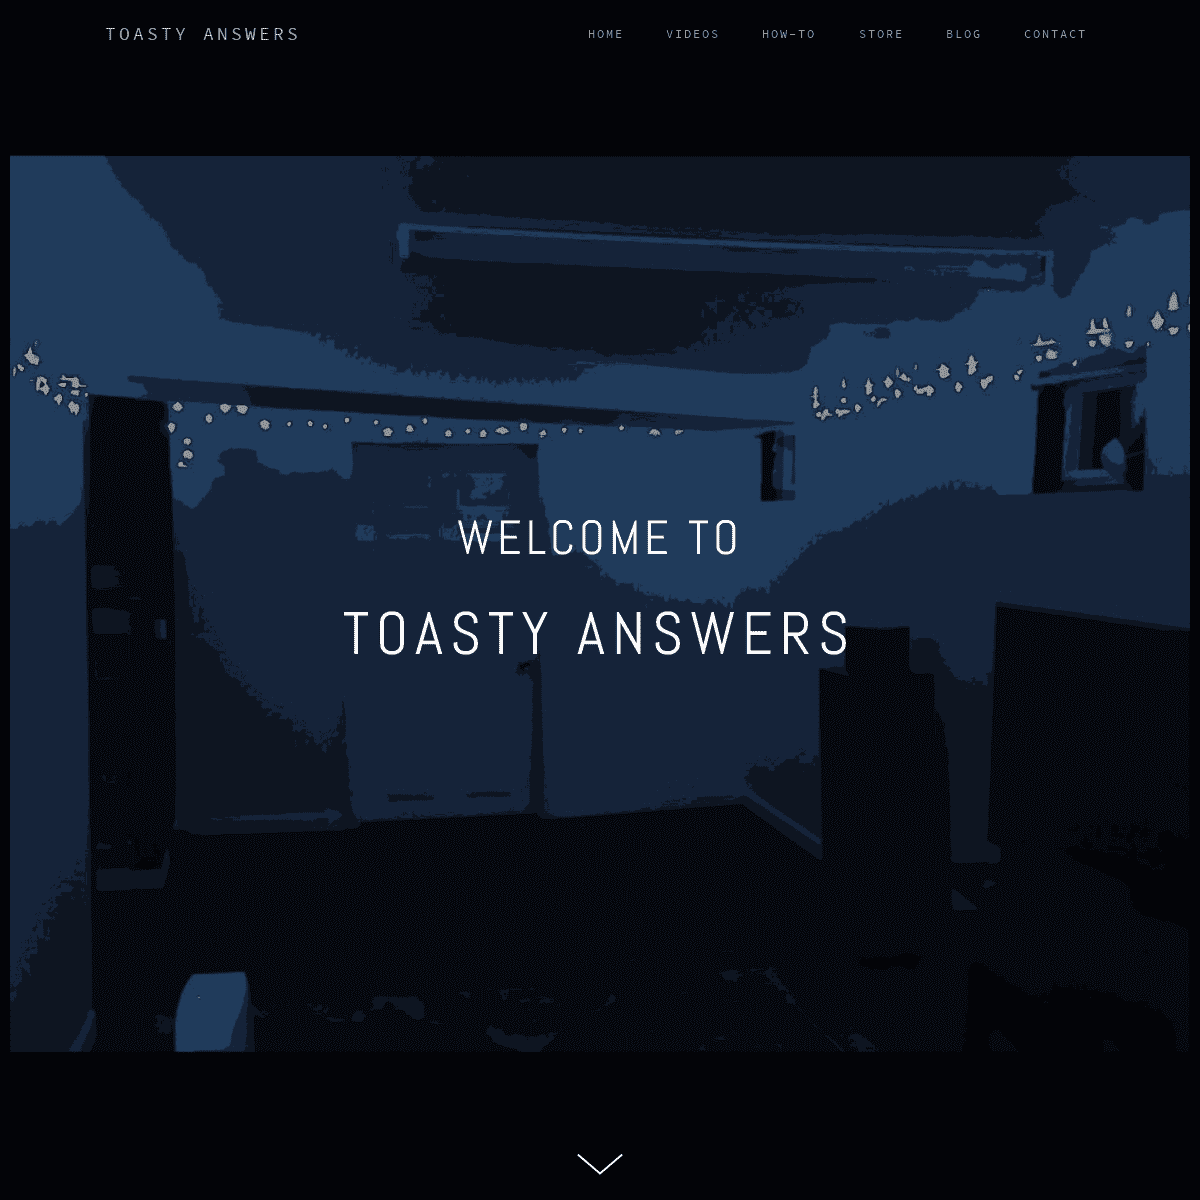 A complete backup of toastyanswers.com